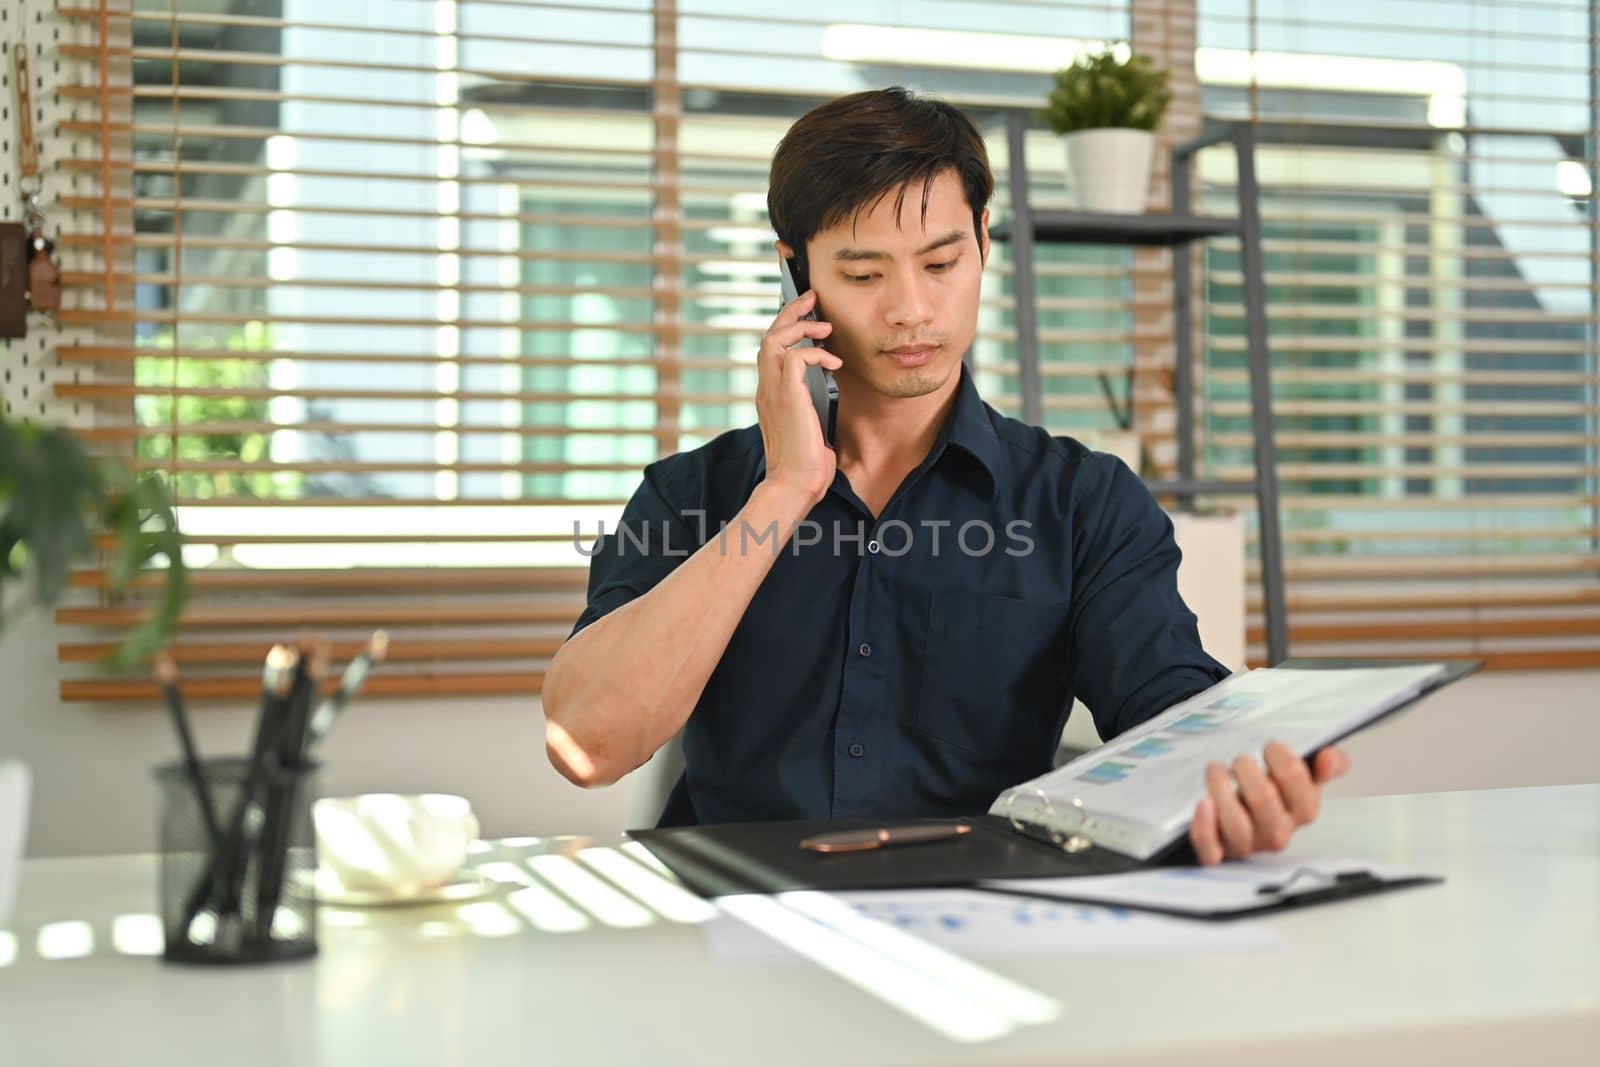 Attractive asian man having phone conversation while working remotely from home by prathanchorruangsak